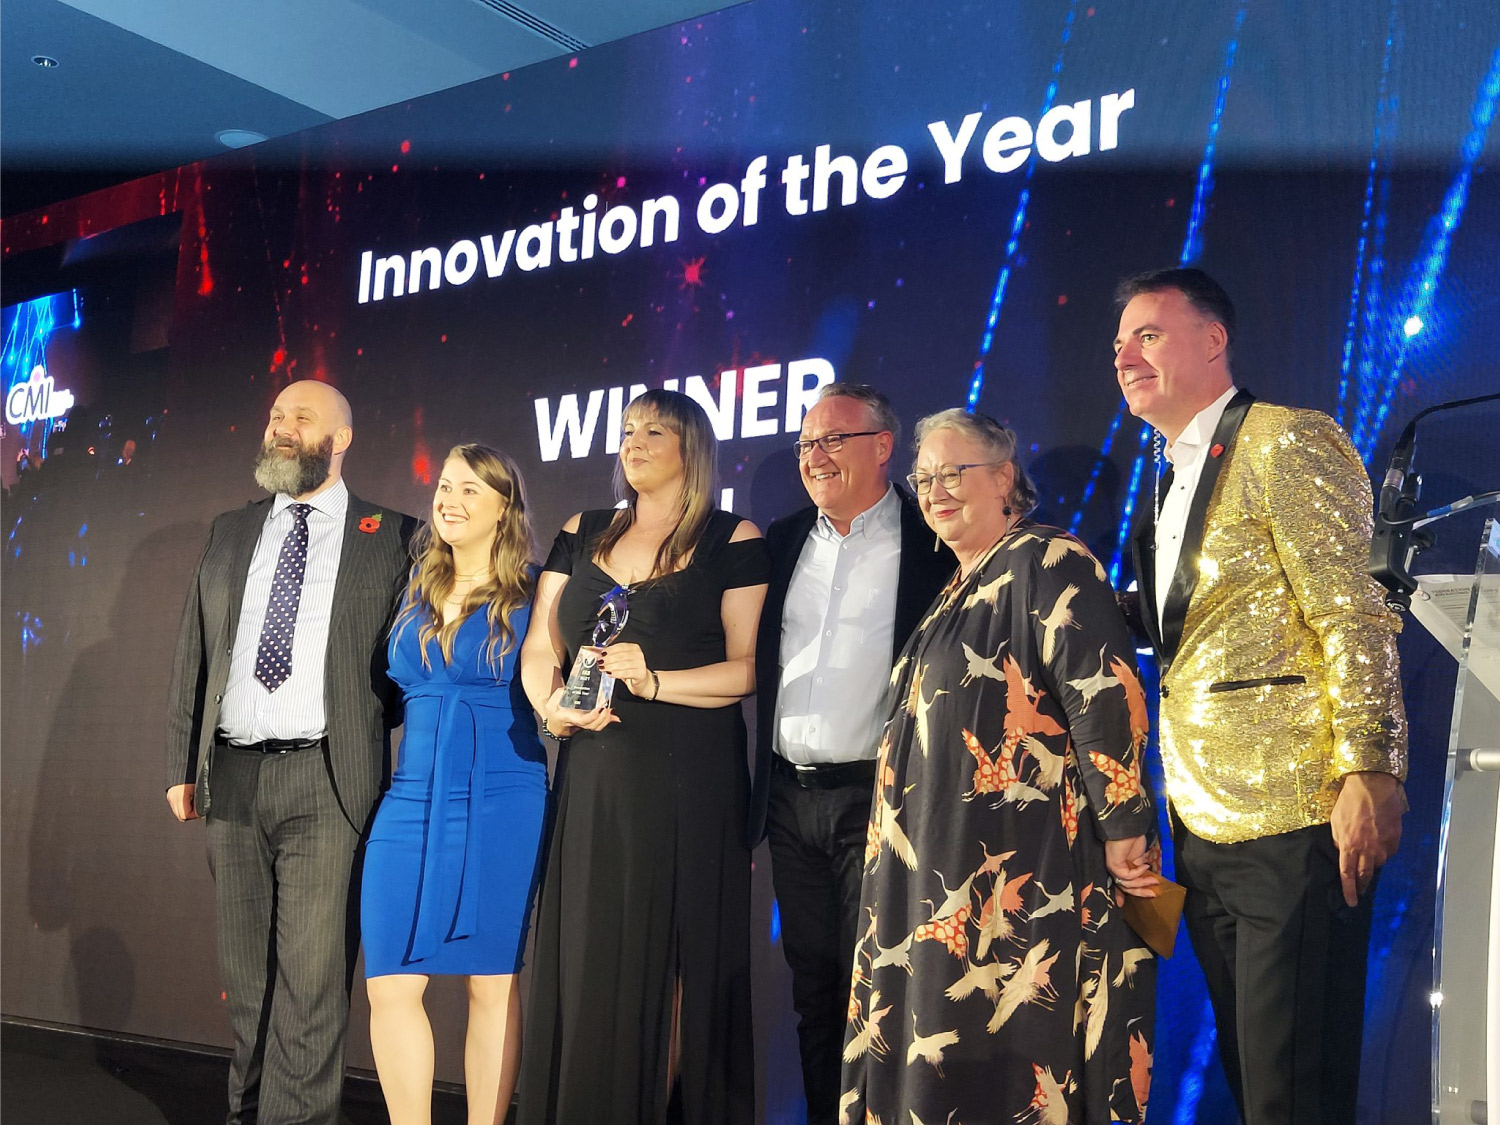 FAB2021 AWARDS NIGHT - INNOVATION OF THE YEAR WINNERS